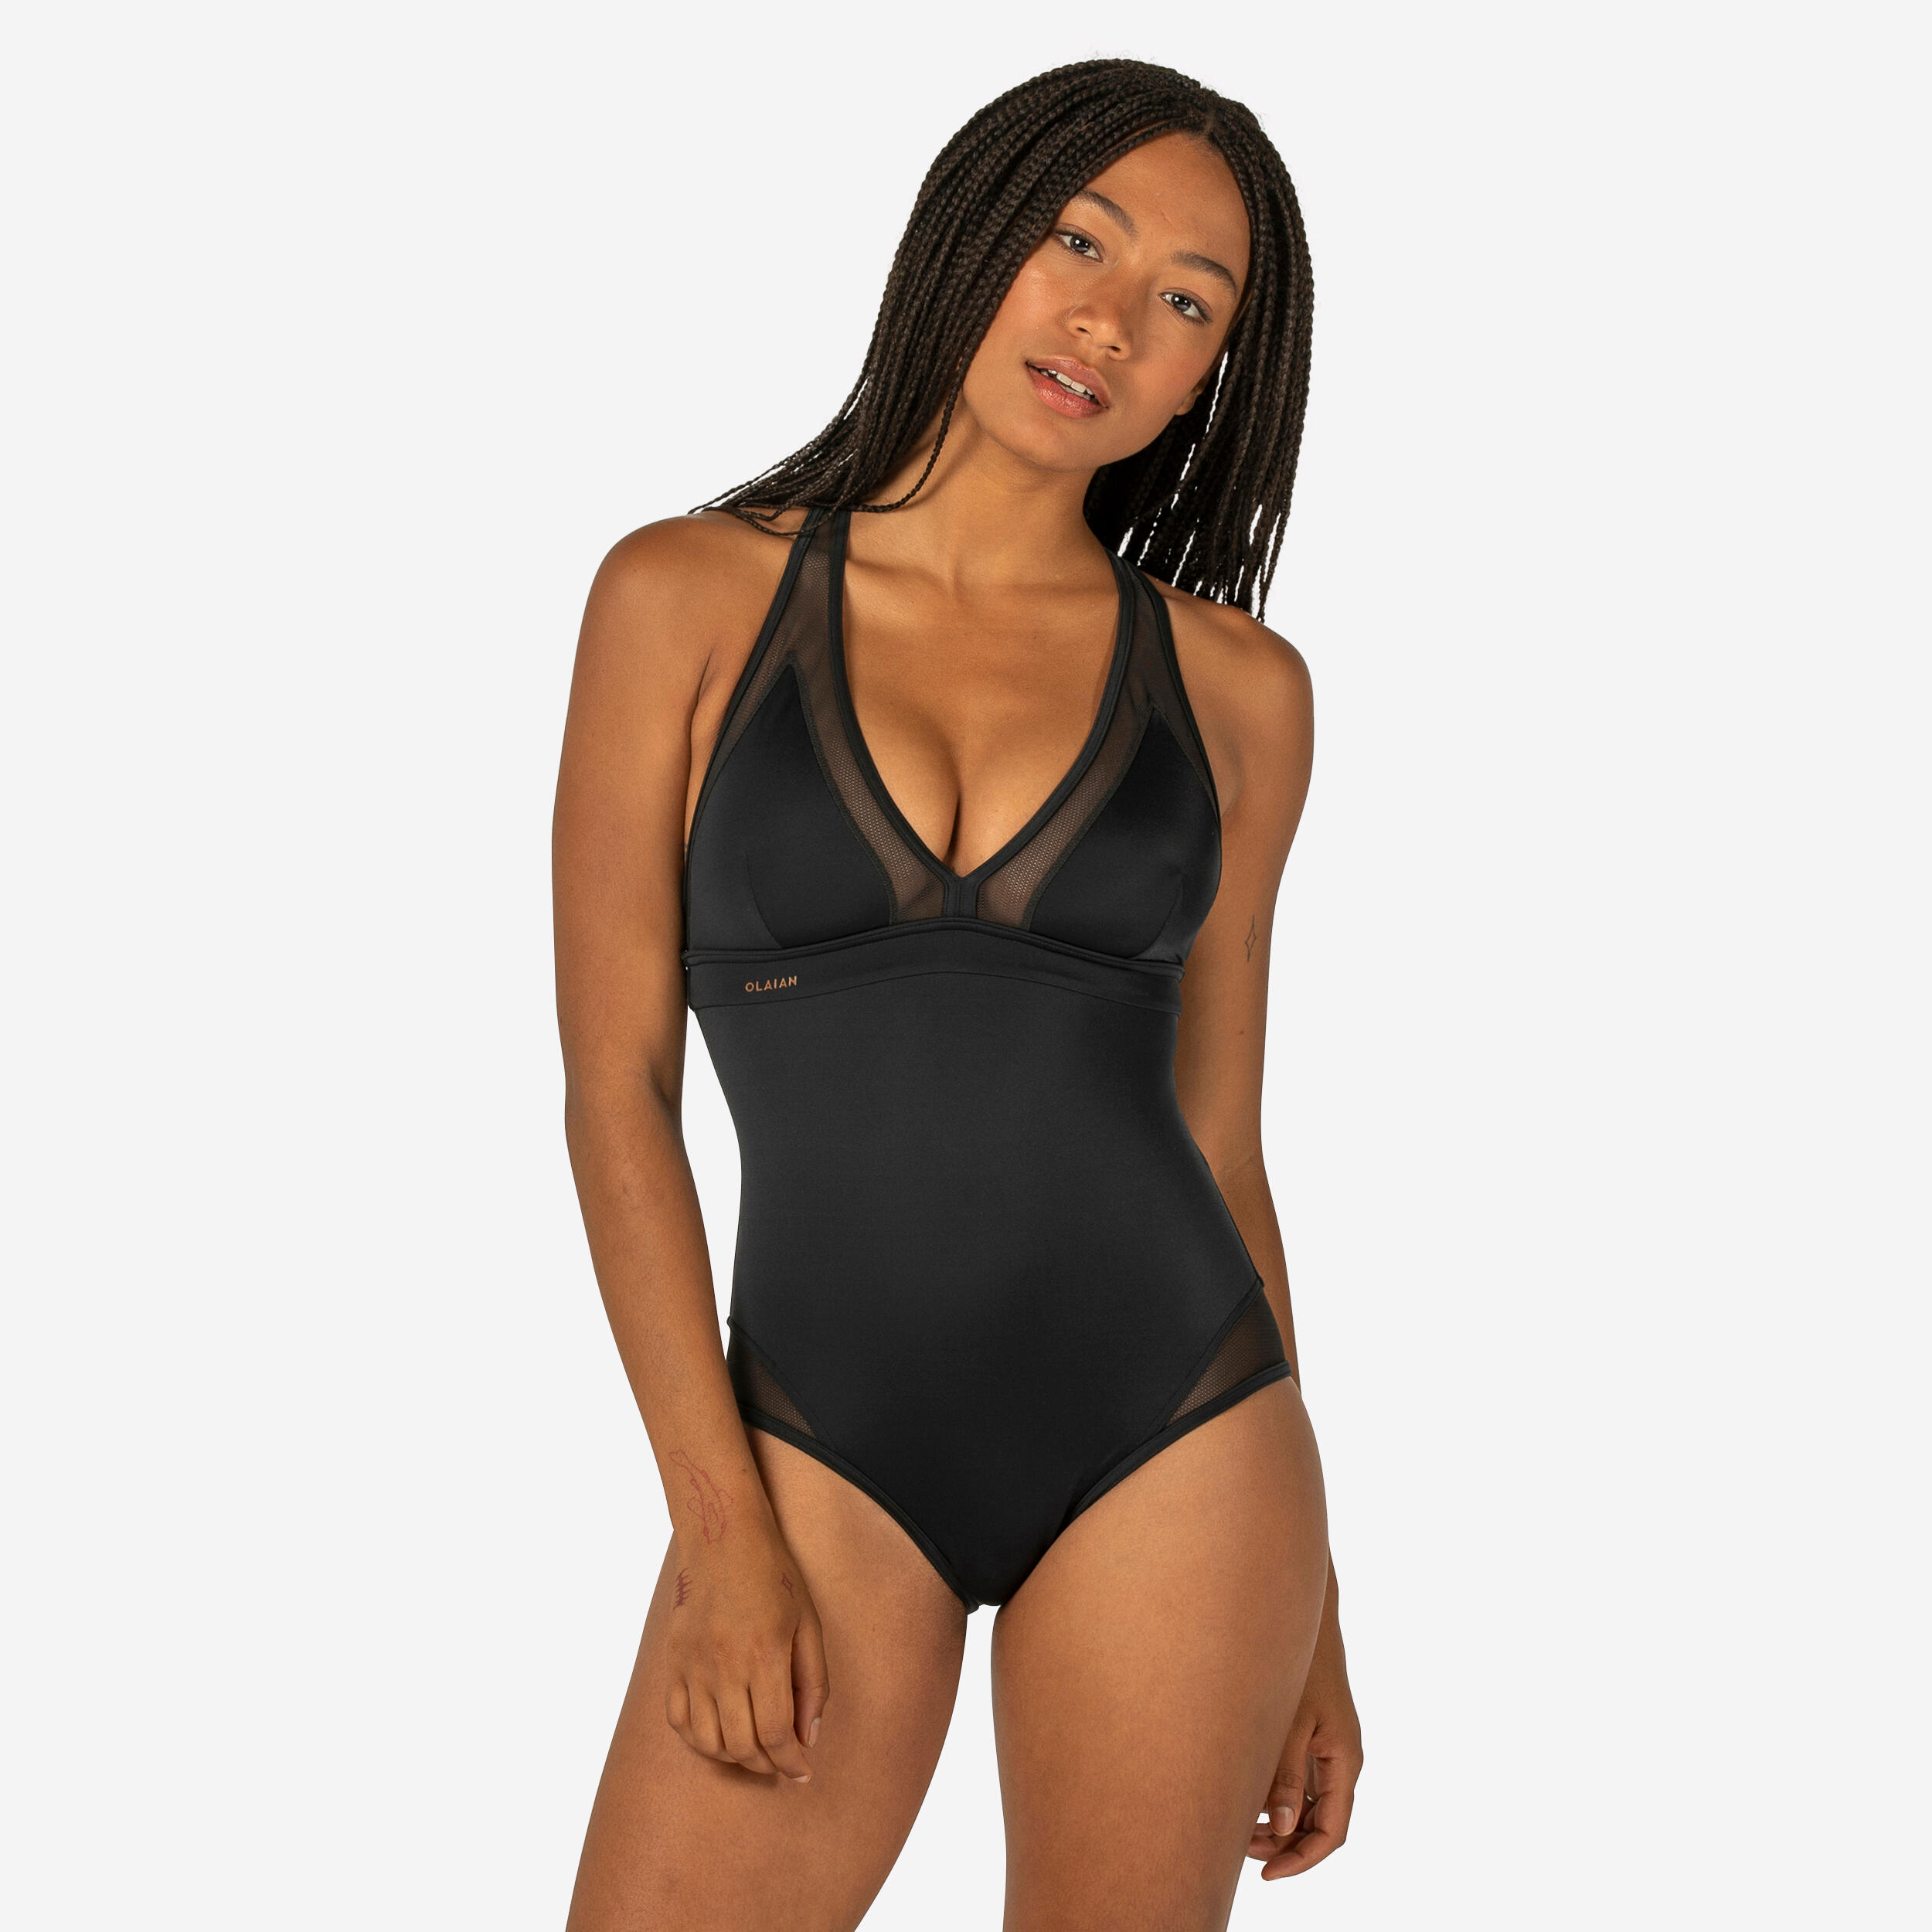 OLAIAN WOMEN'S SURFING SWIMSUIT WITH X BACK ISA